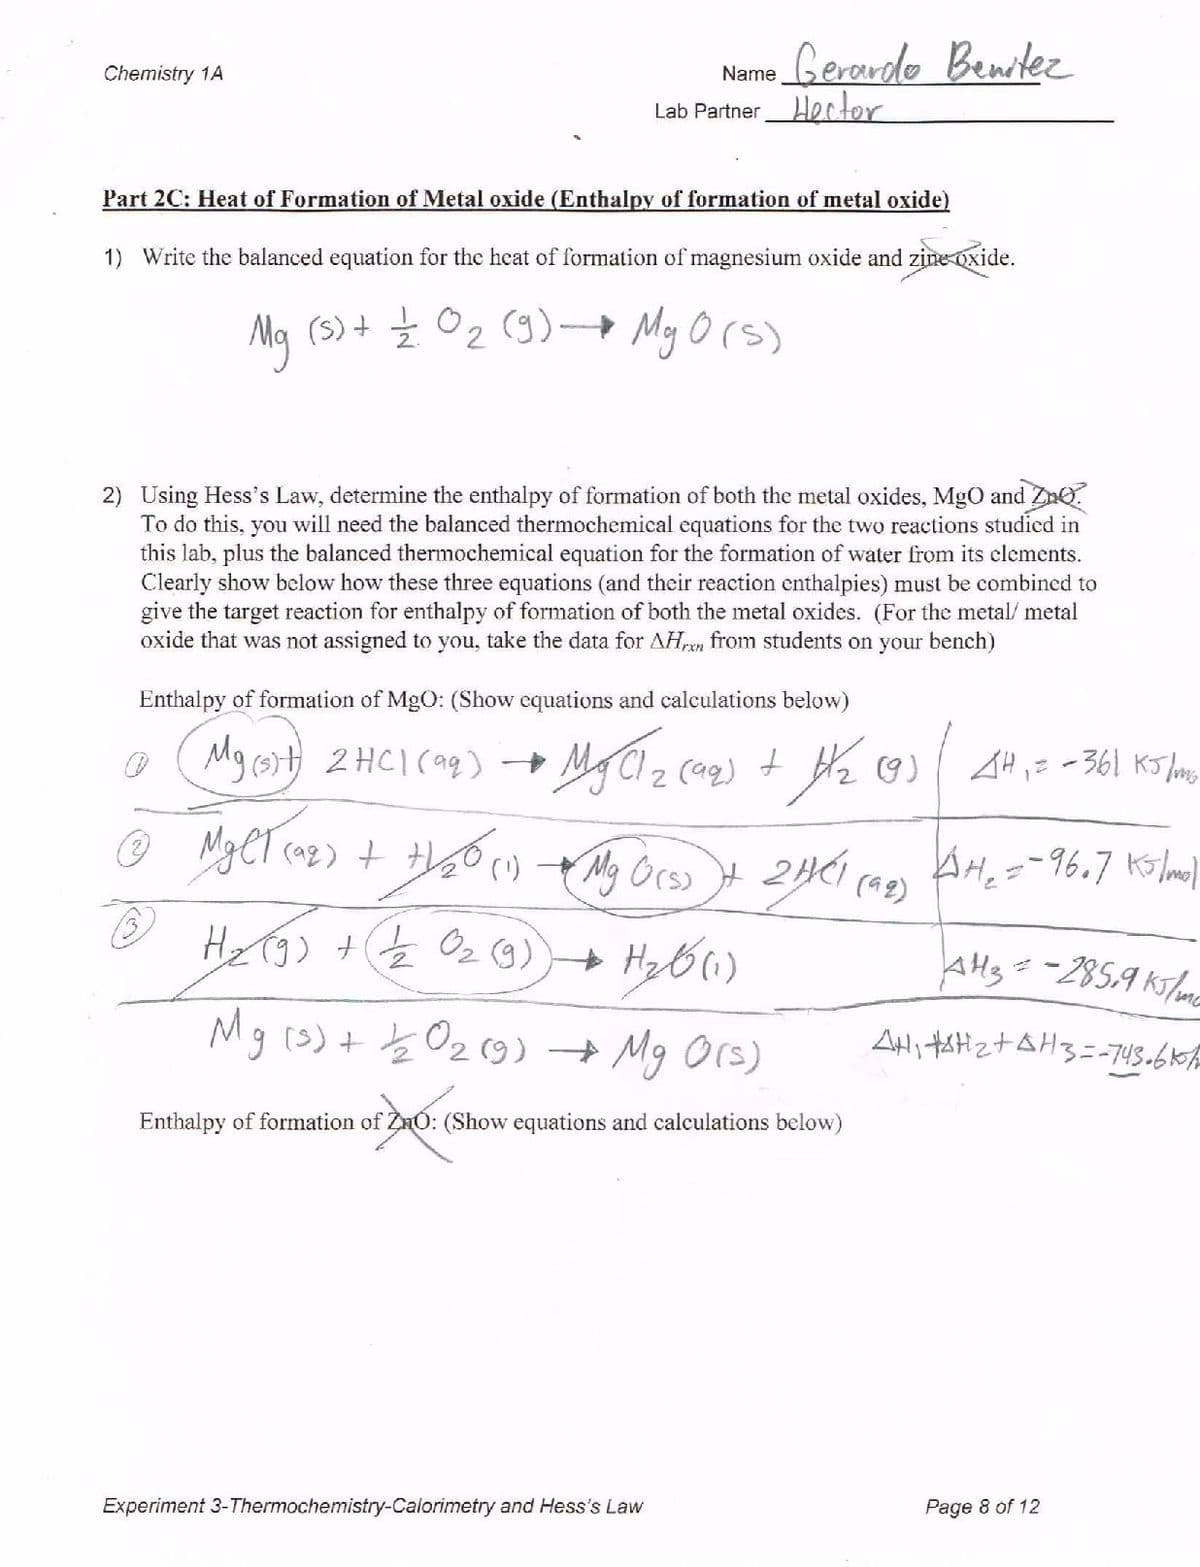 Gerardo Benitez
Chemistry 1A
Name
Lab Partner Hector
Part 2C: Heat of Formation of Metal oxide (Enthalpy of formation of metal oxide)
1) Write the balanced equation for the heat of formation of magnesium oxide and zine oxide.
Ma (s)+ Ź O2 (9) Mg O (s)
2) Using Hess's Law, determine the enthalpy of formation of both the metal oxides, MgO and ZnO.
To do this, you will need the balanced thermochemical equations for the two reactions studicd in
this lab, plus the balanced thermochemical equation for the formation of water from its clements.
Clearly show below how these three equations (and their reaction enthalpies) must be combined to
give the target reaction for enthalpy of formation of both the metal oxides. (For the metal/ metal
oxide that was not assigned to you, take the data for AHn from students on your bench)
Enthalpy of formation of MgO: (Show equations and calculations below)
Mg(3)サ 2HC1(ag)→
(aq) + H2 9)
(a2) t
My Orso
AH3=-285,9 ks/mc
Mg (s)+ b Oz(9) + Mg Ors)
Enthalpy of formation of ZnO: (Show equations and calculations below)
Experiment 3-Thermochemistry-Calorimetry and Hess's Law
Page 8 of 12
